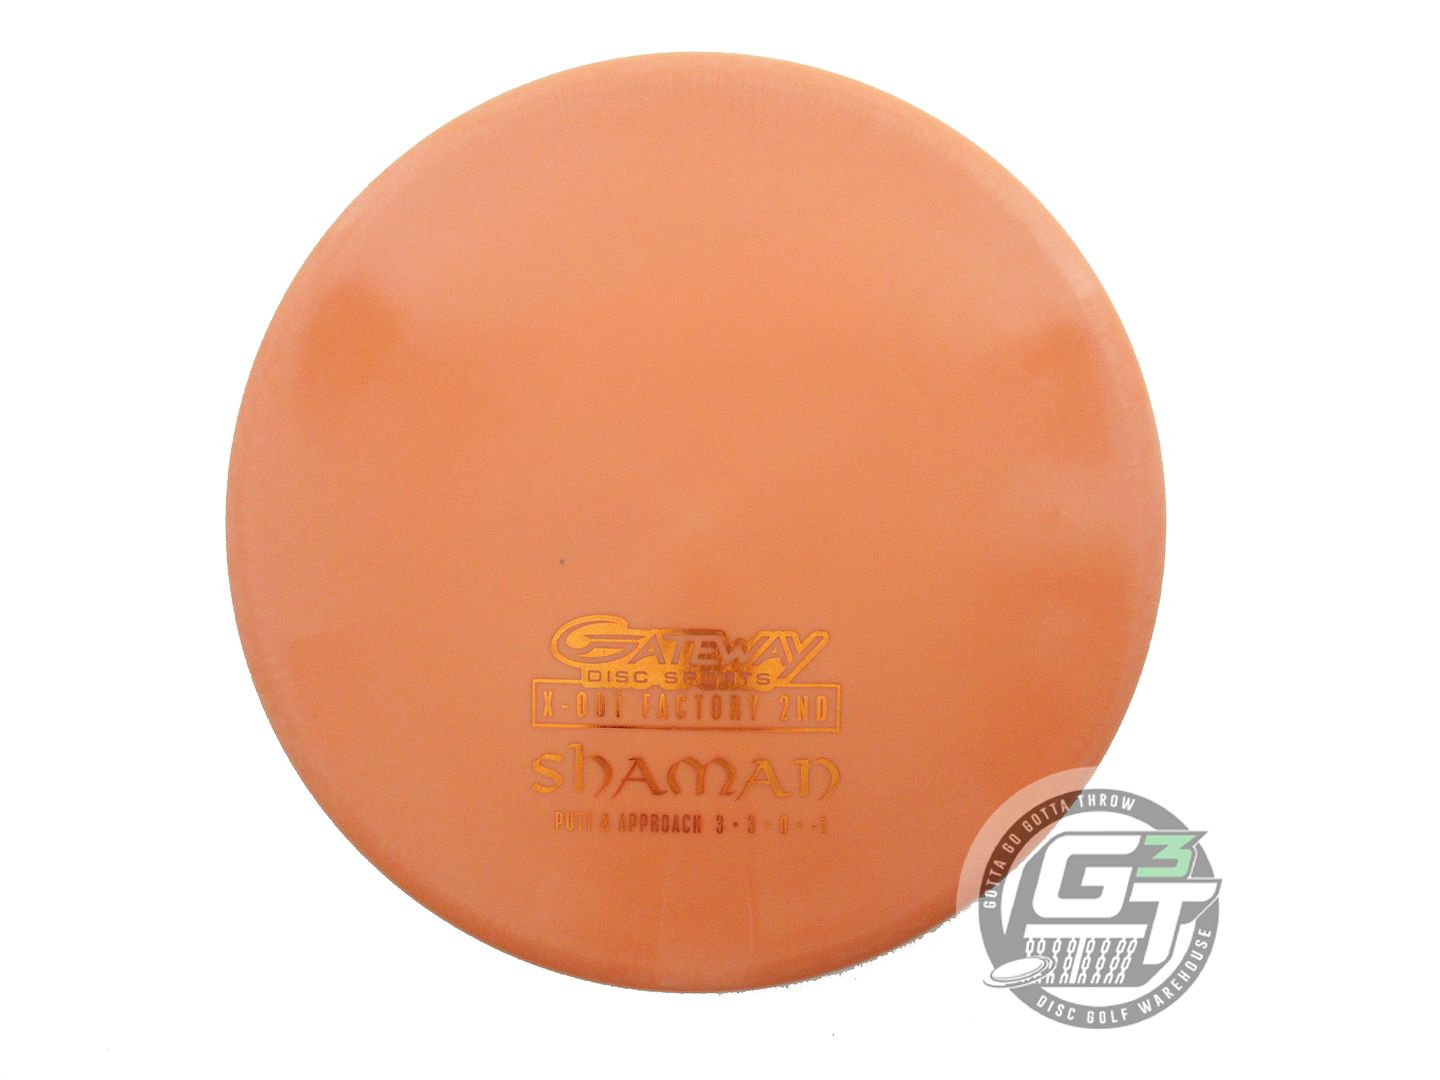 Gateway Factory Second Diamond Shaman Putter Golf Disc (Individually Listed)